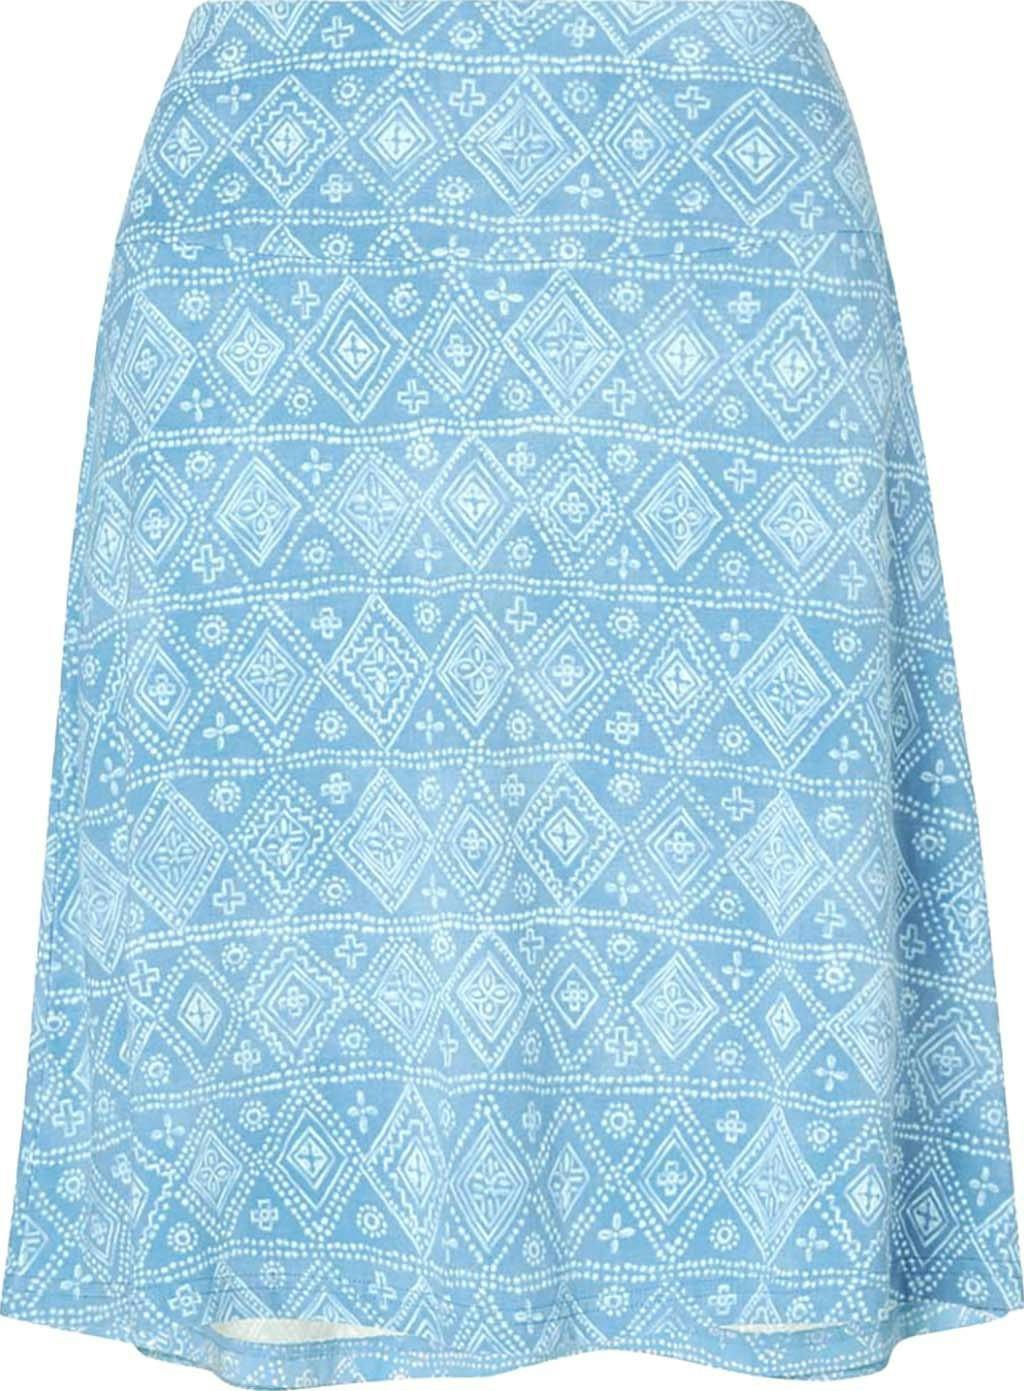 Product image for Padma Pull-On Skirt - Women's